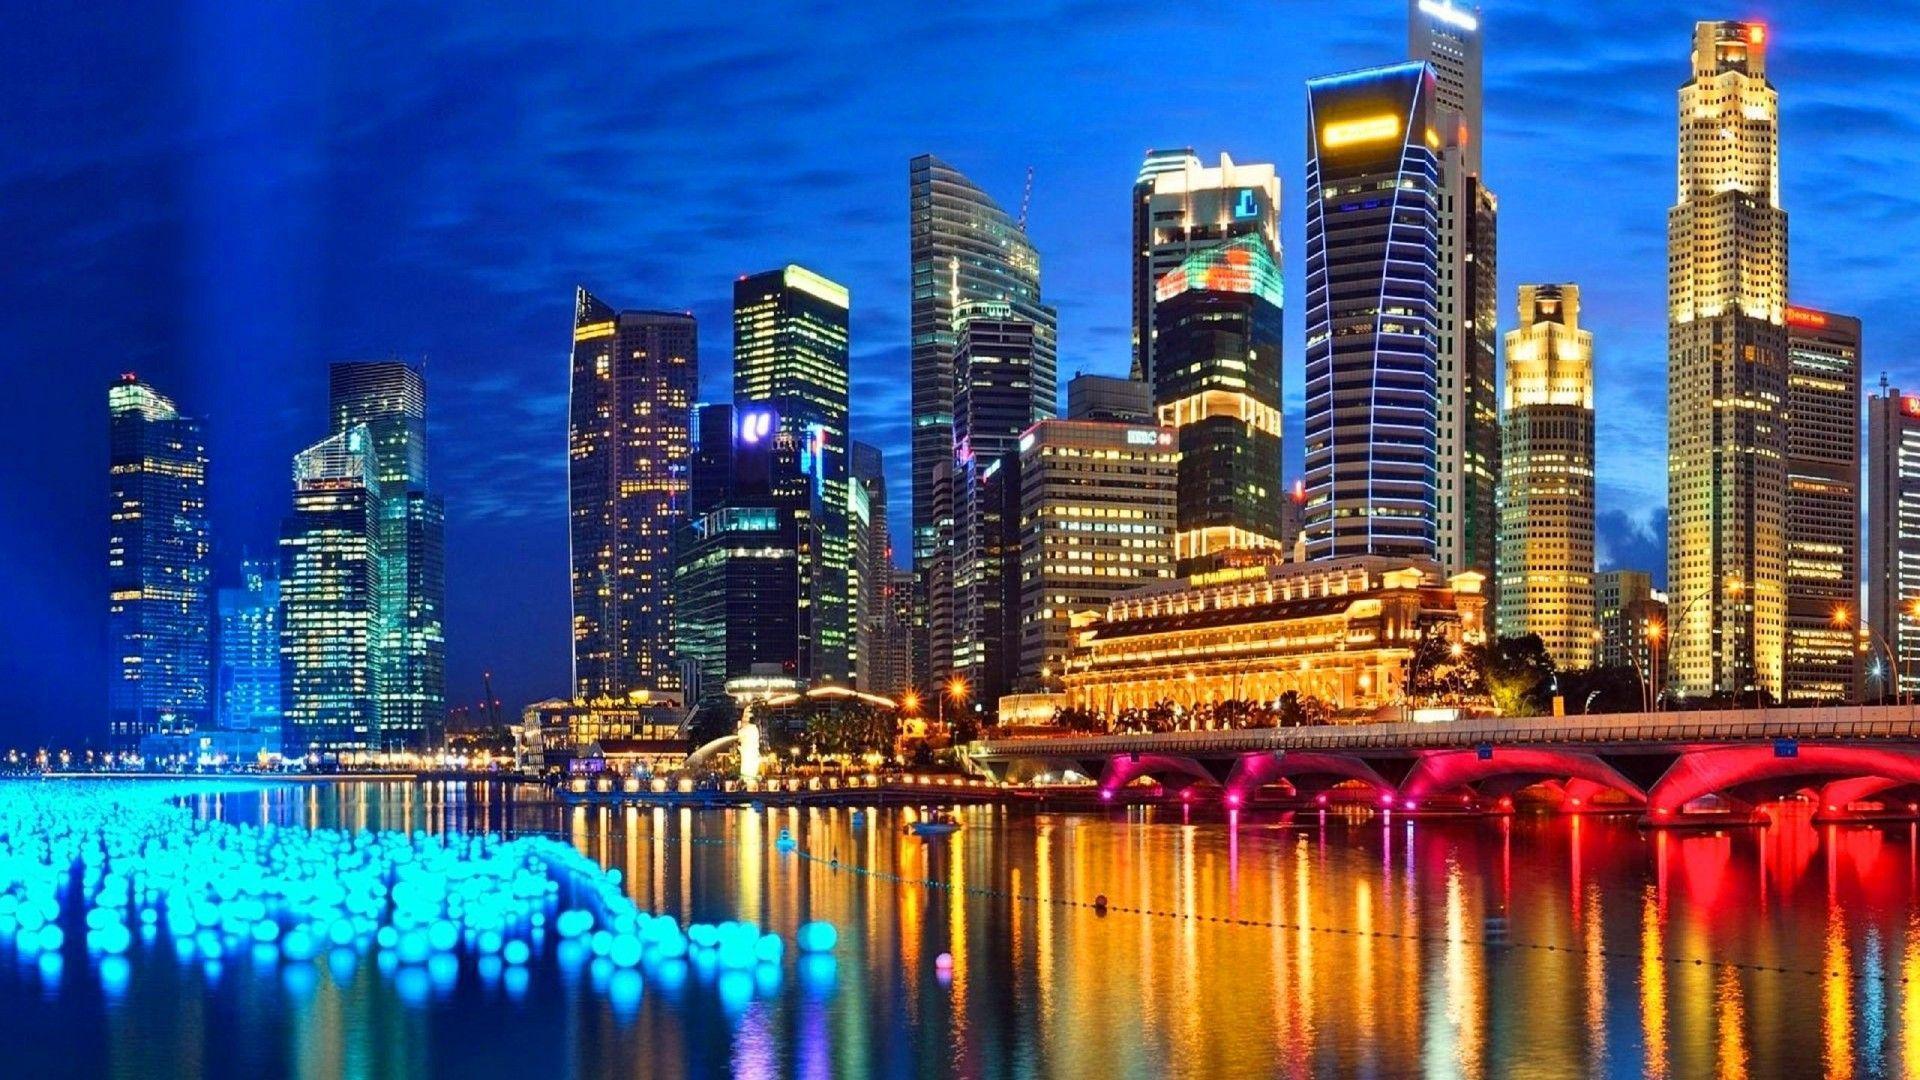 Download wallpapers 4k, Singapore, skyscrapers, skyline cityscapes, modern  buildings, Asia, nightscapes, asian cities, Singapore at night for desktop  free. Pictures for desktop free